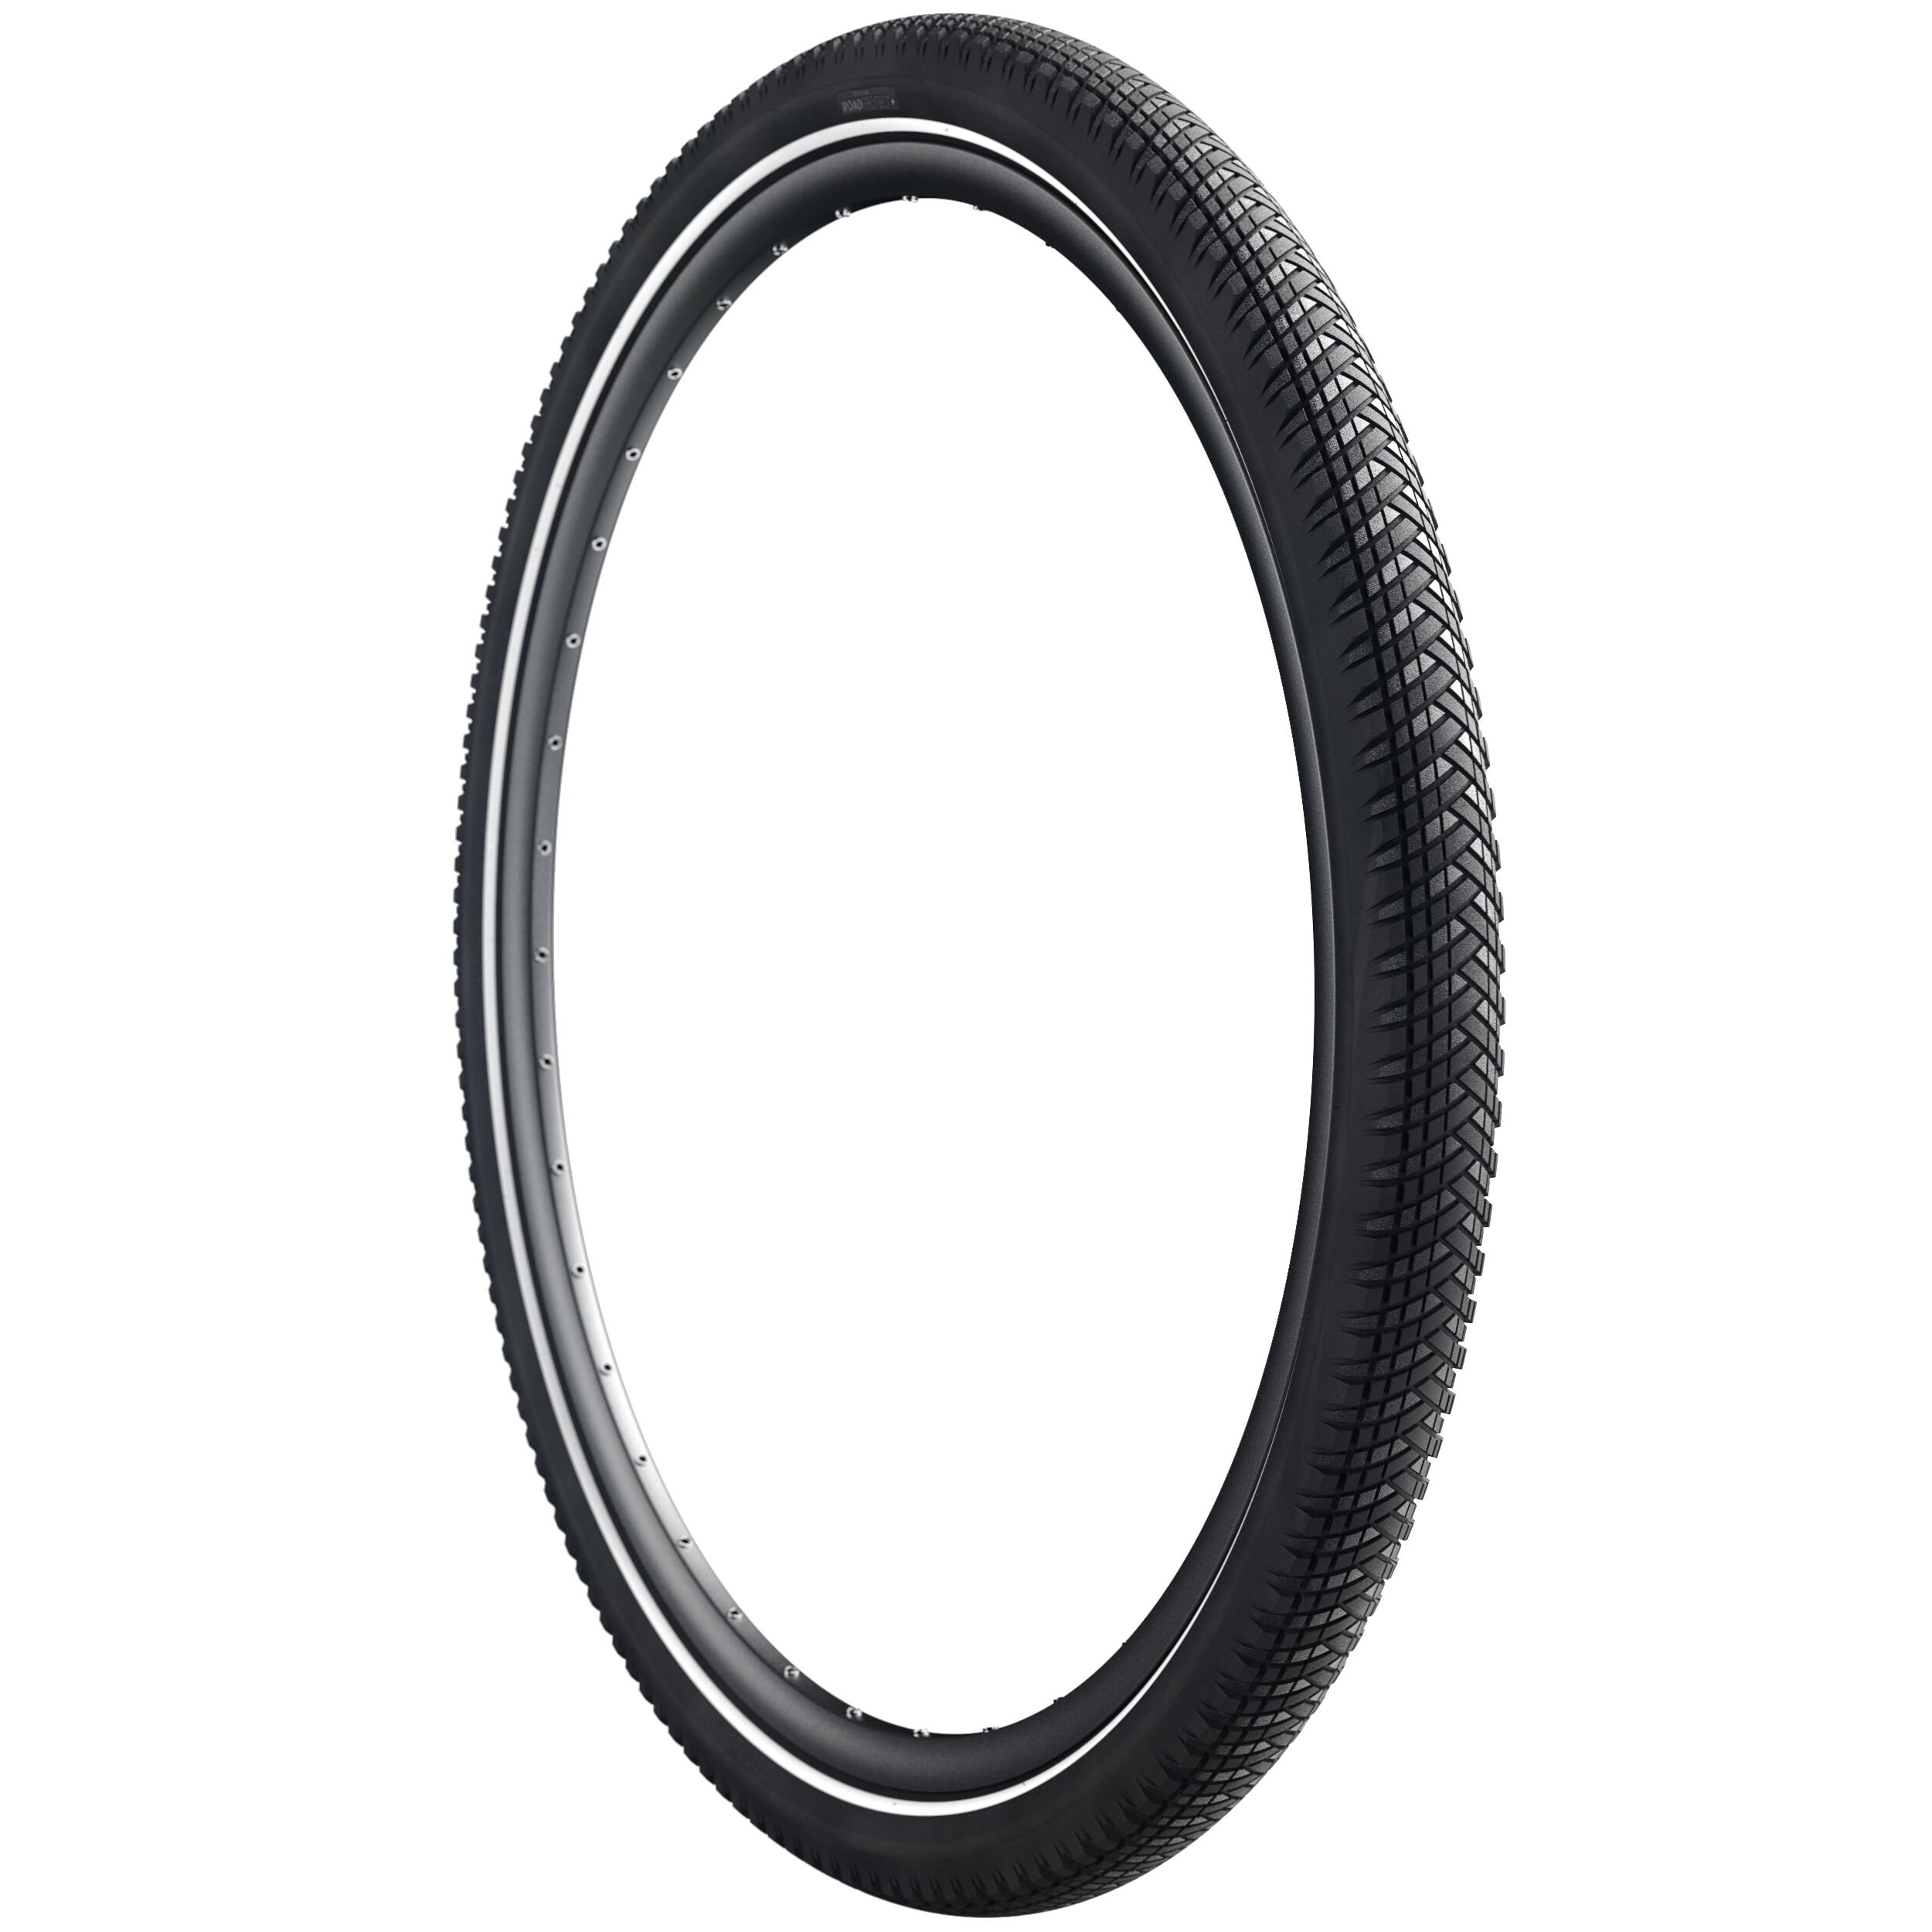 Puncture-Proof Hybrid Electric Bike Tyre RoadProtect+ 700 x 47 mm 4/4